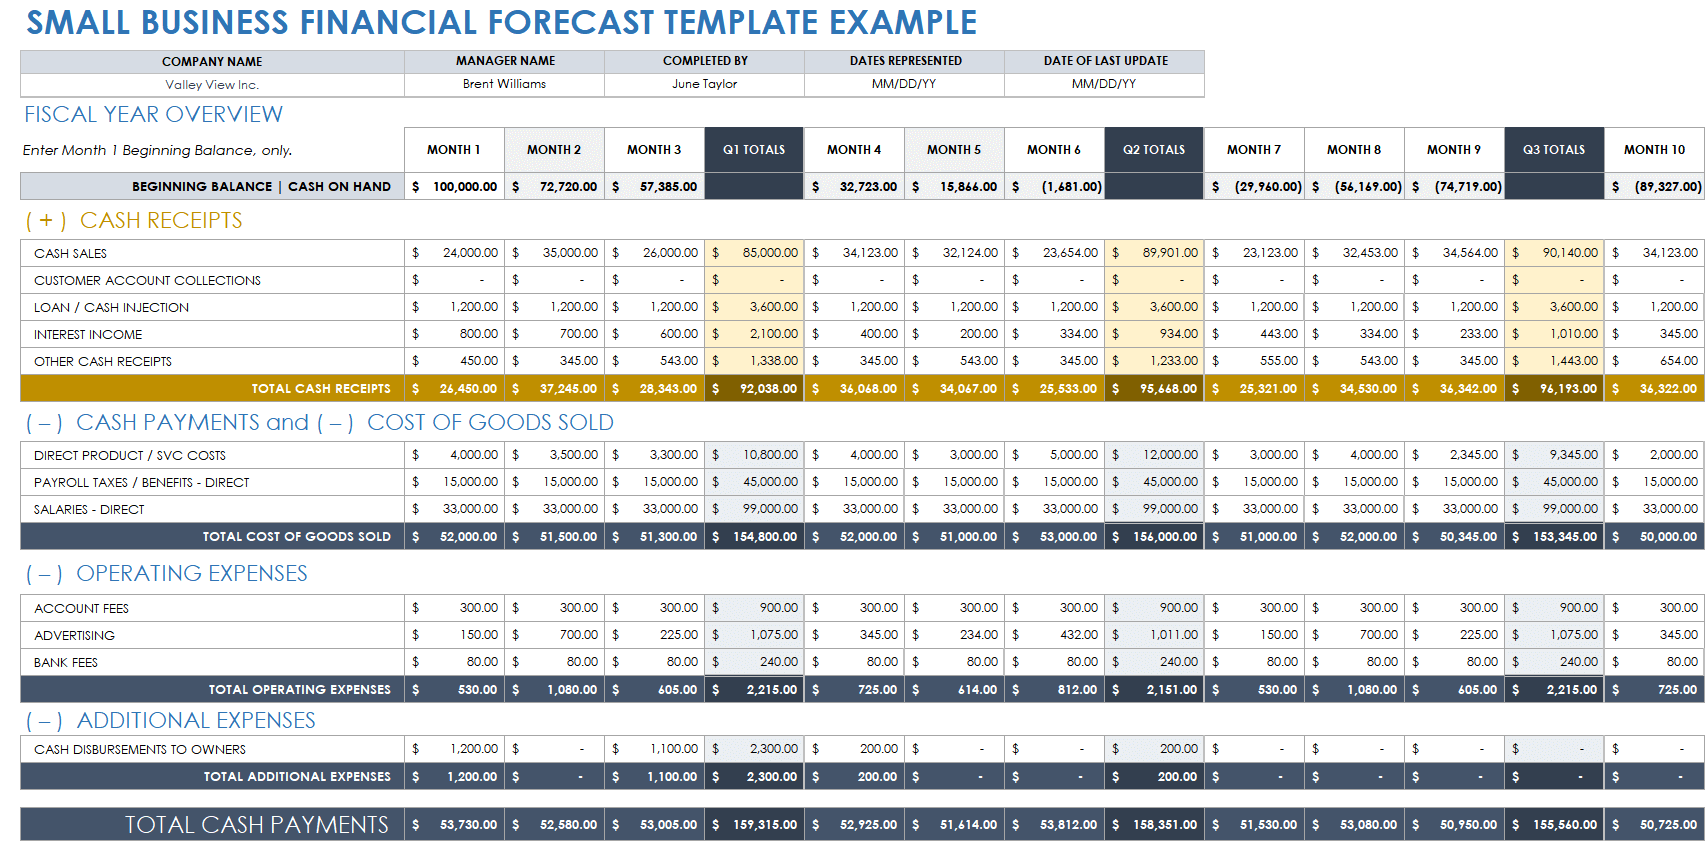 Small Business Financial Forecast Example Template